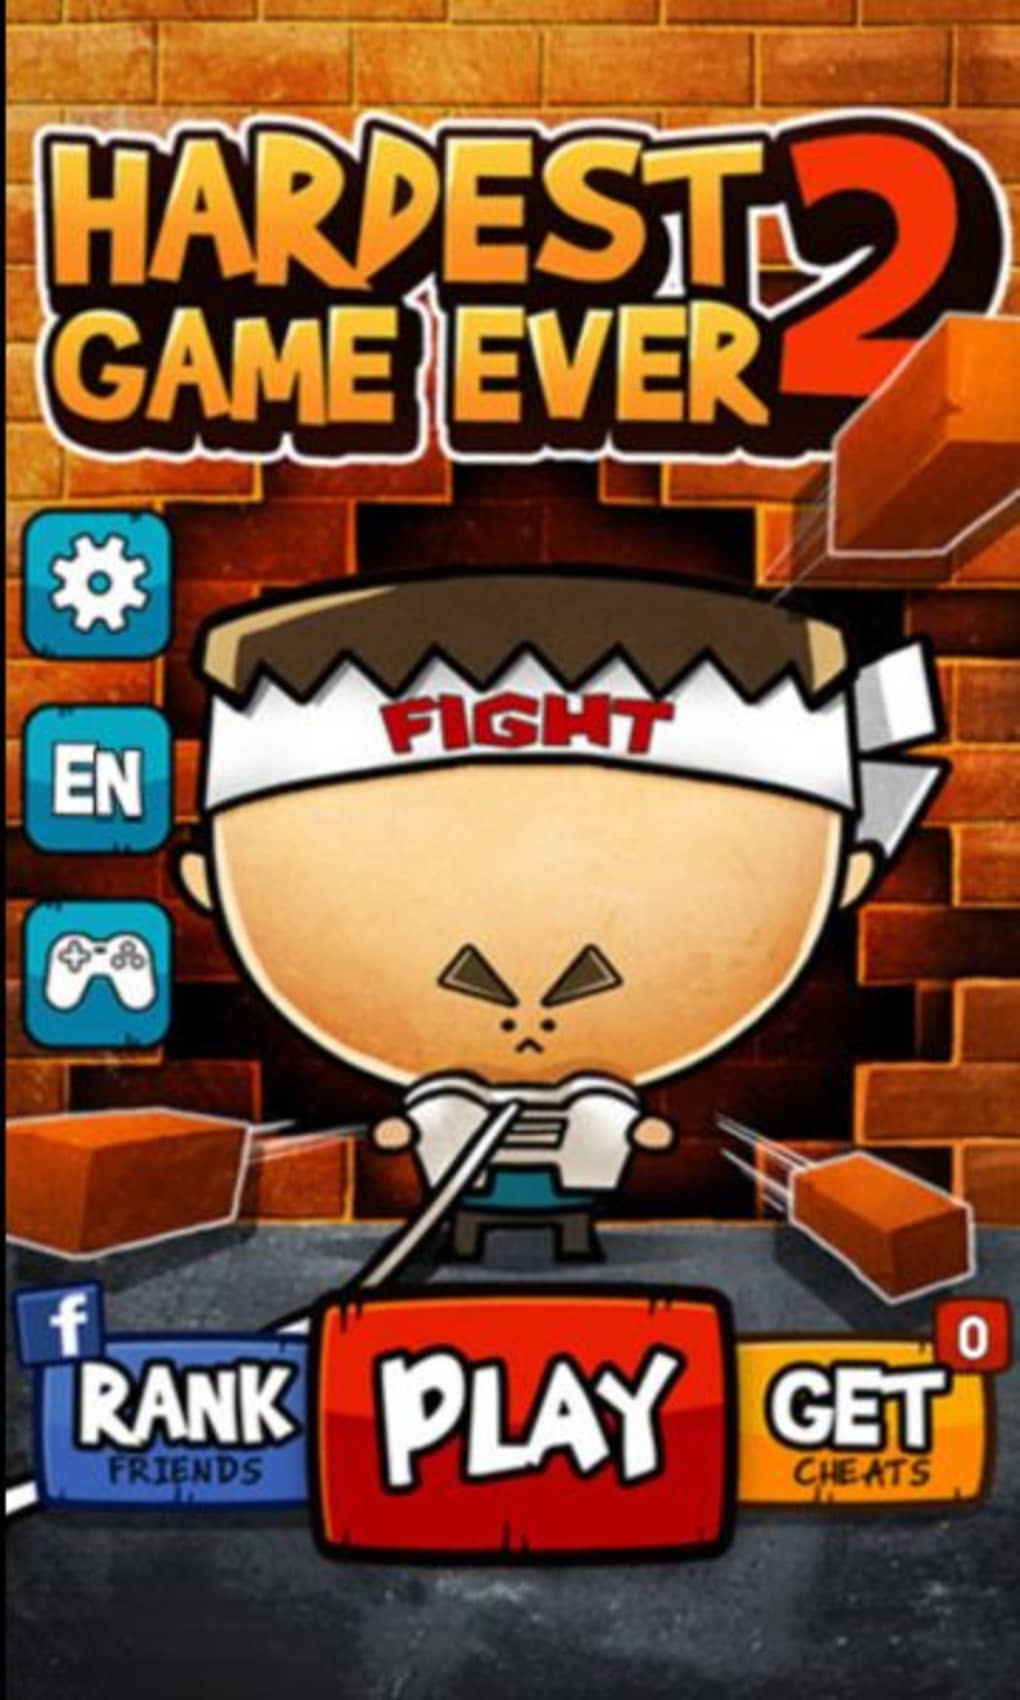 iPhone App Reviews » Blog Archive » Top 25 Free: Hardest Game Ever